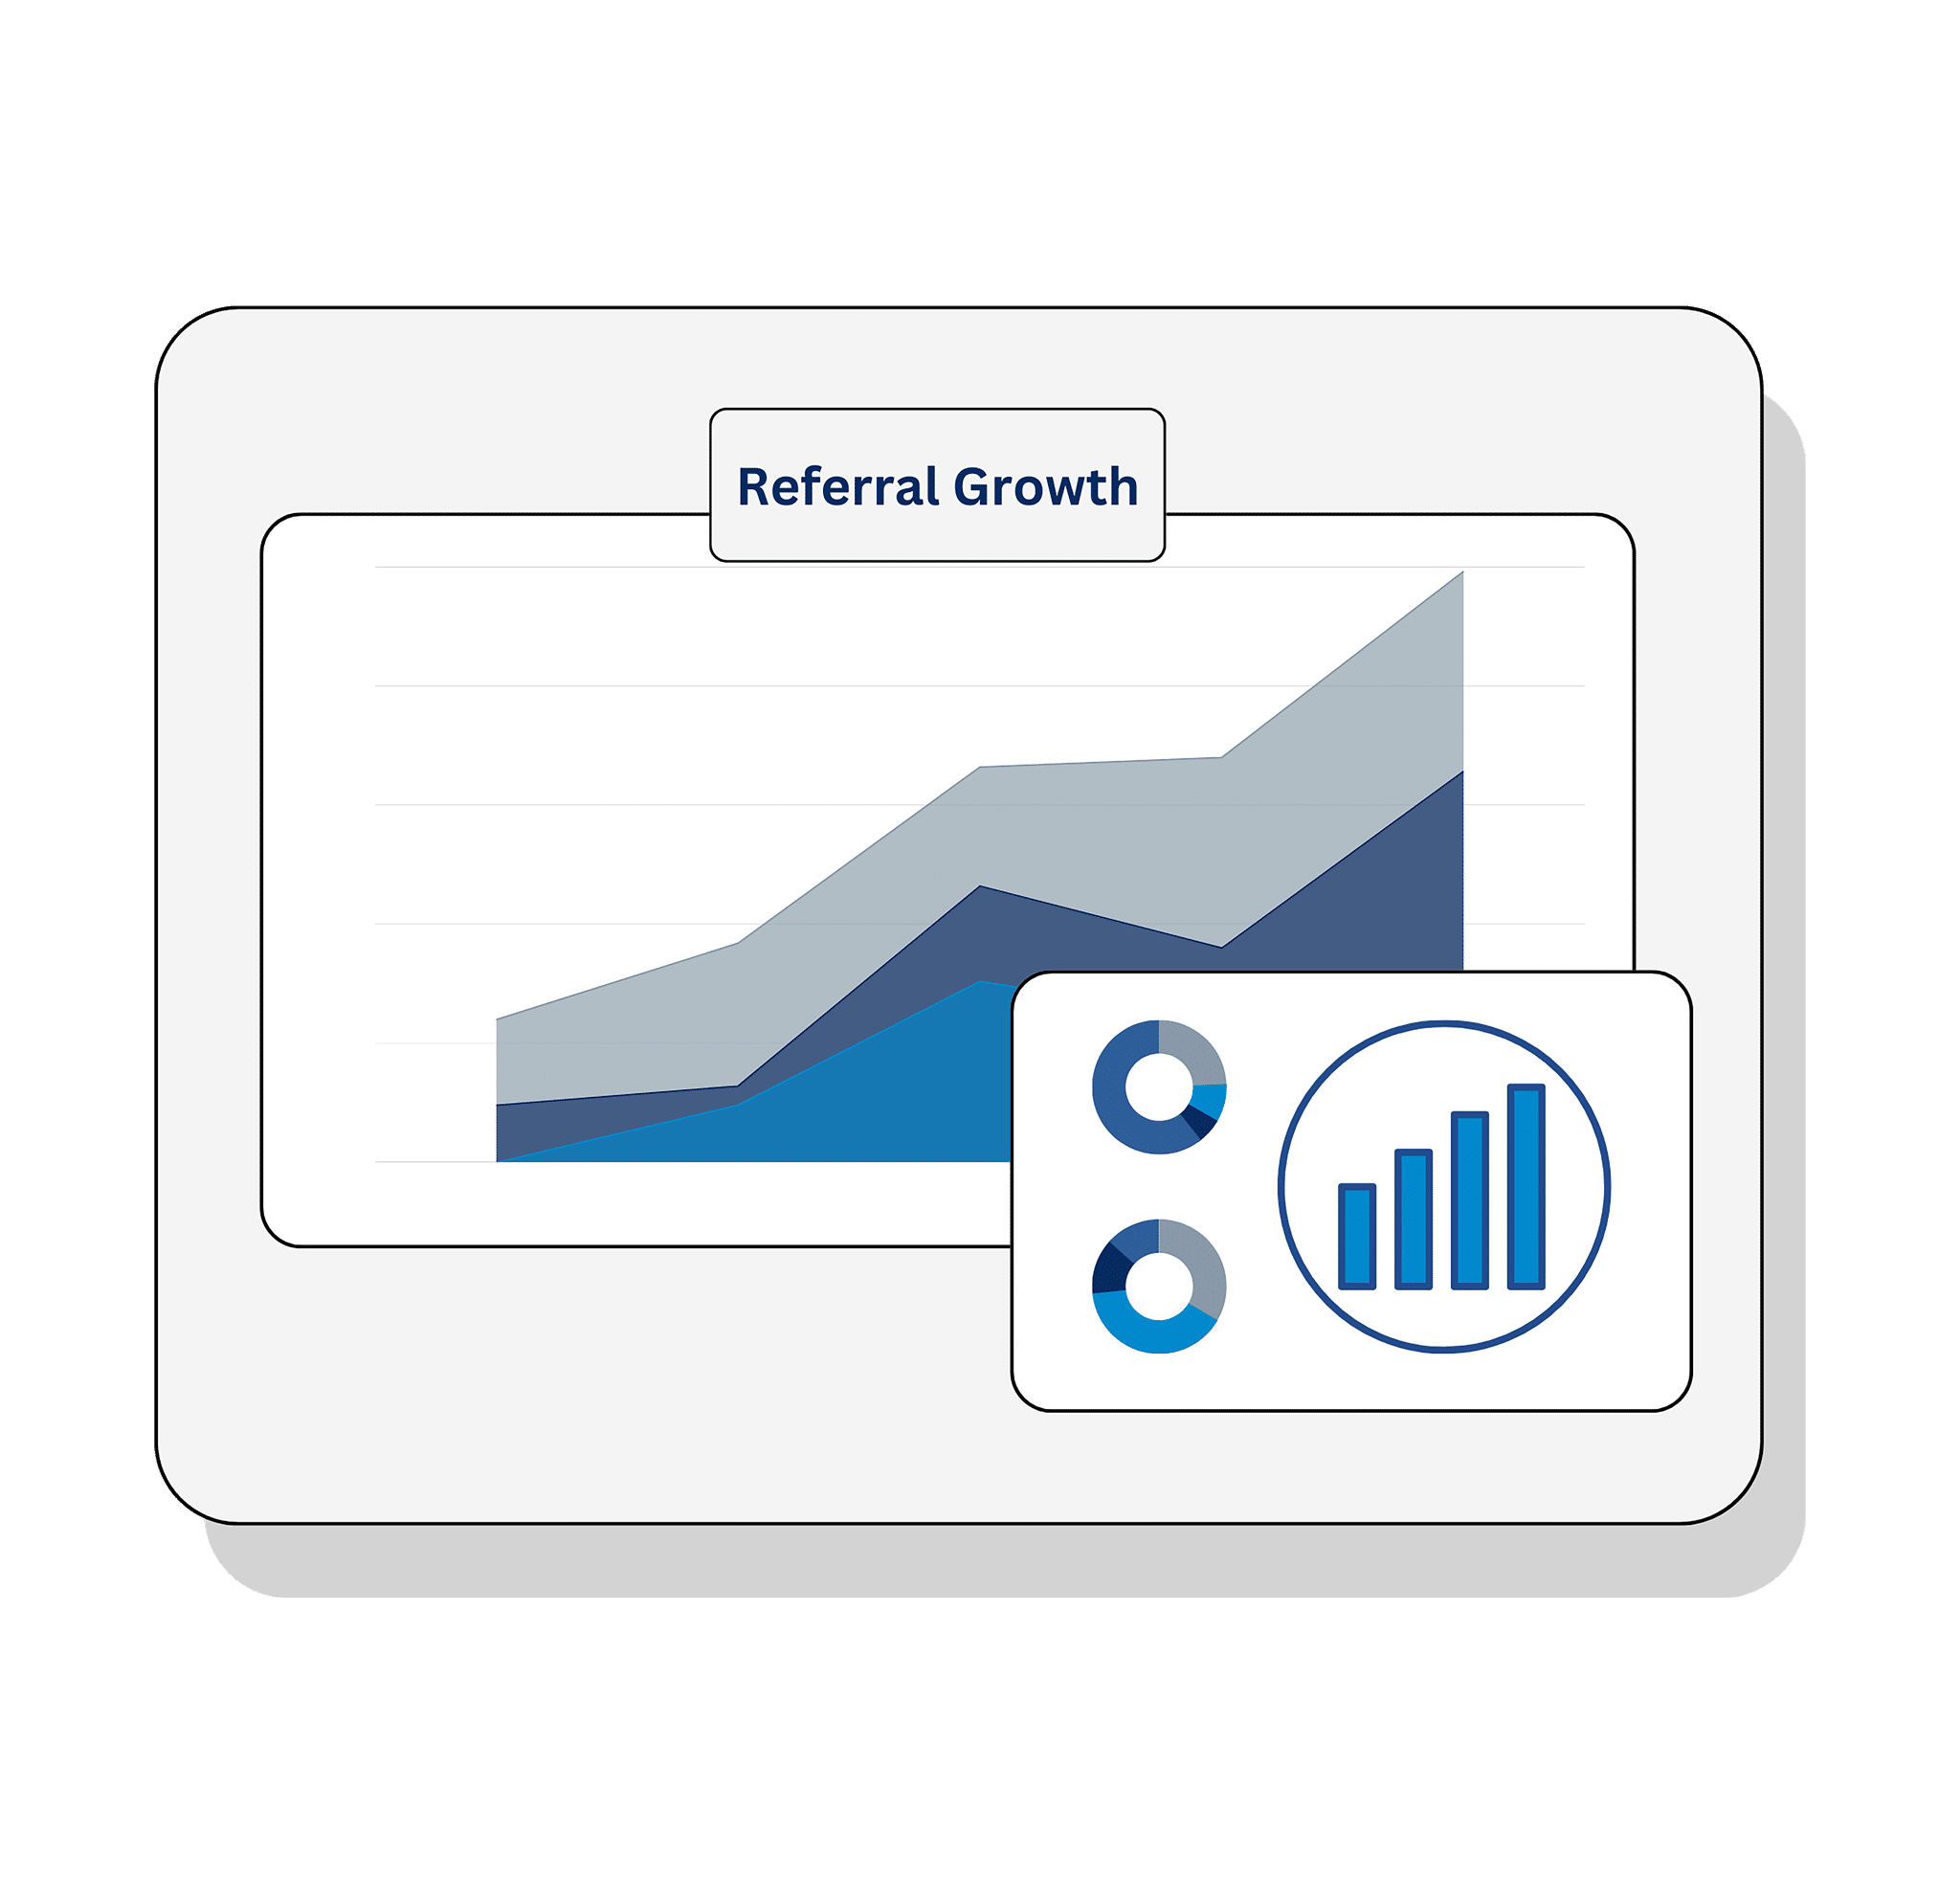 Referral growth chart